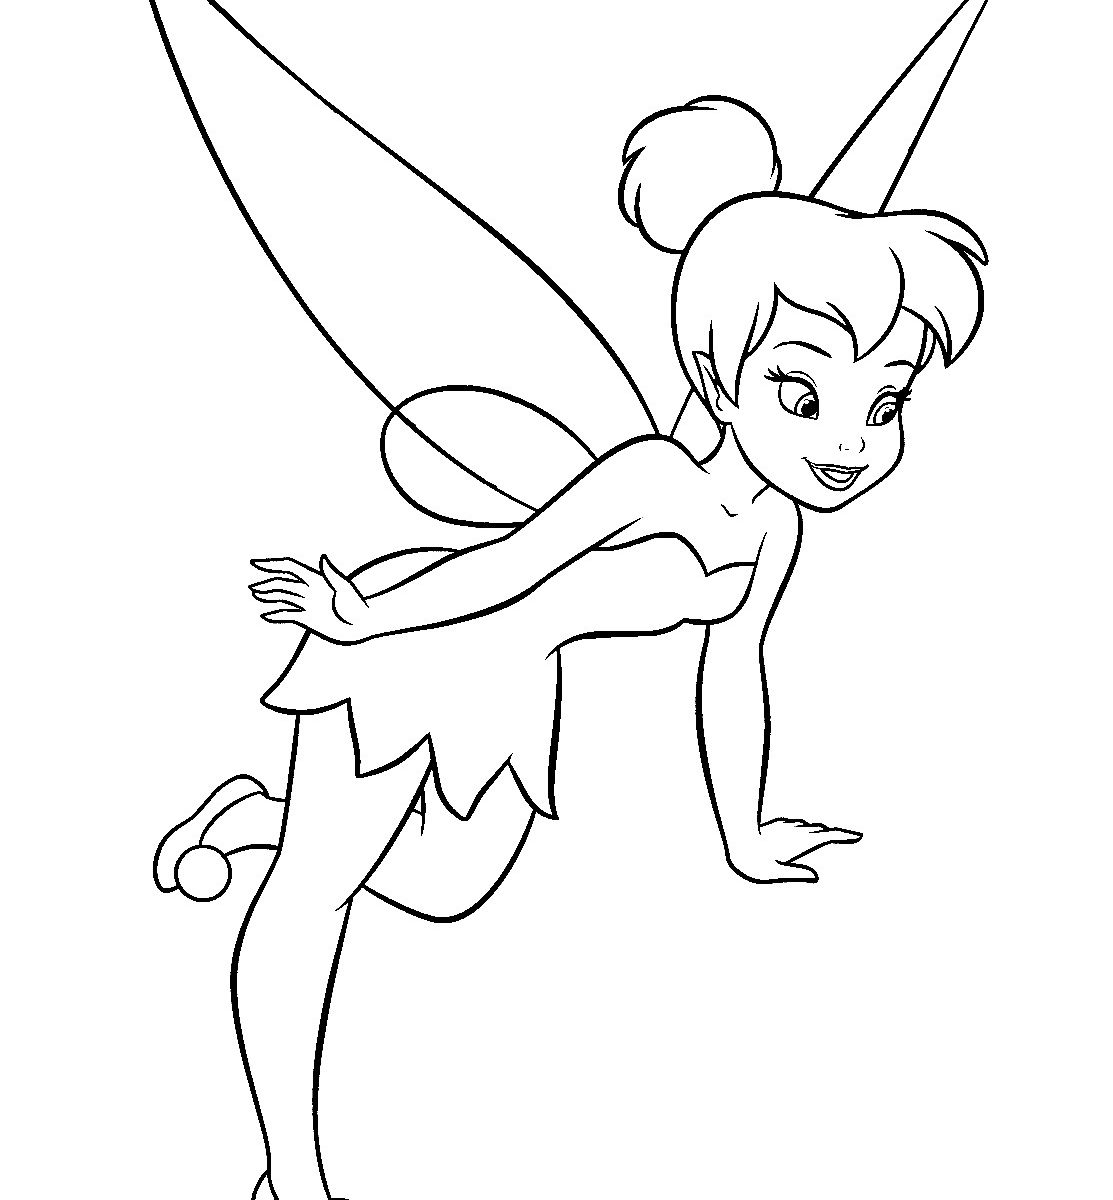 Free Printable Coloring Pages Fairies Adults Coloring Pages Pixie Hollow Coloring Pages Free For Adults